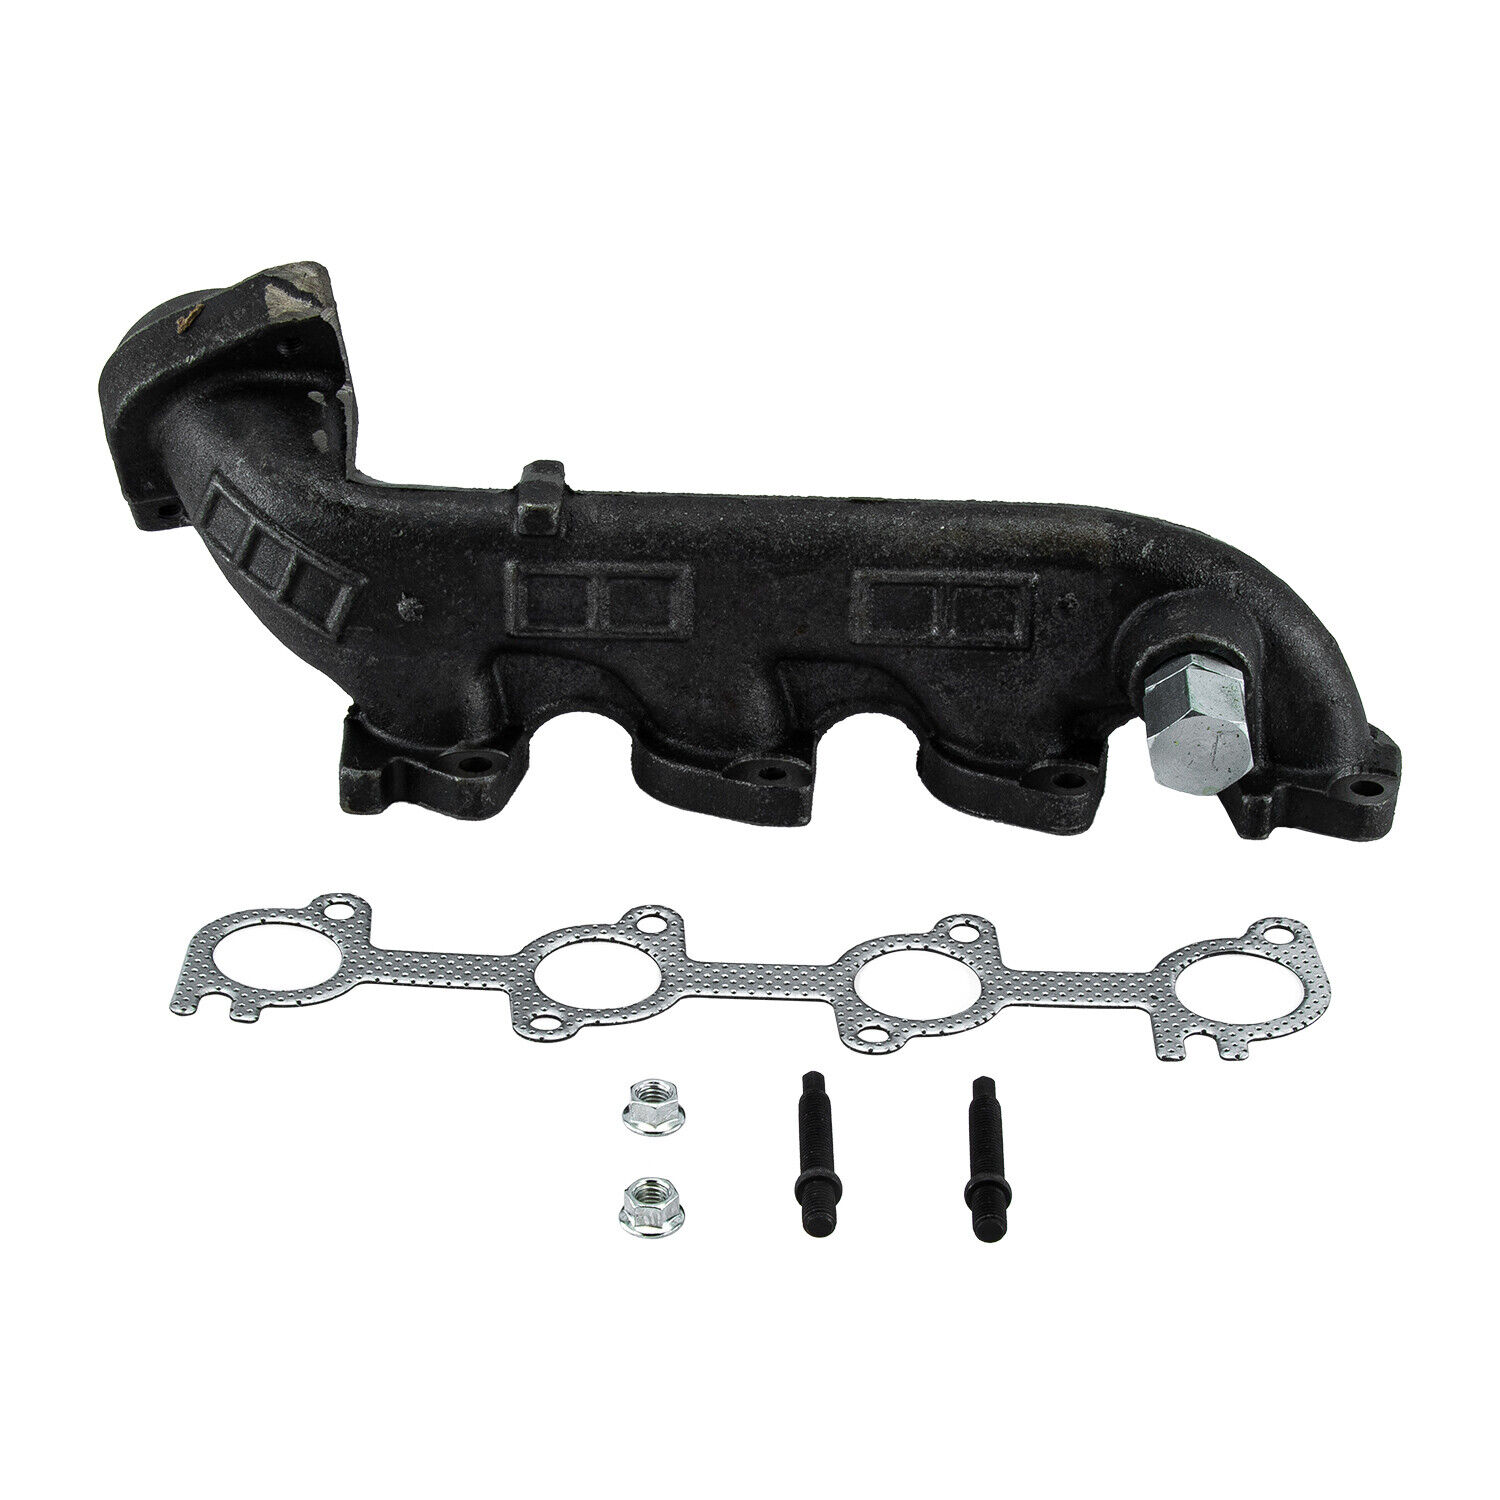 Left Exhaust Manifold Driver For Ford F250 F350 Excursion Van 5.4L 2000-2016